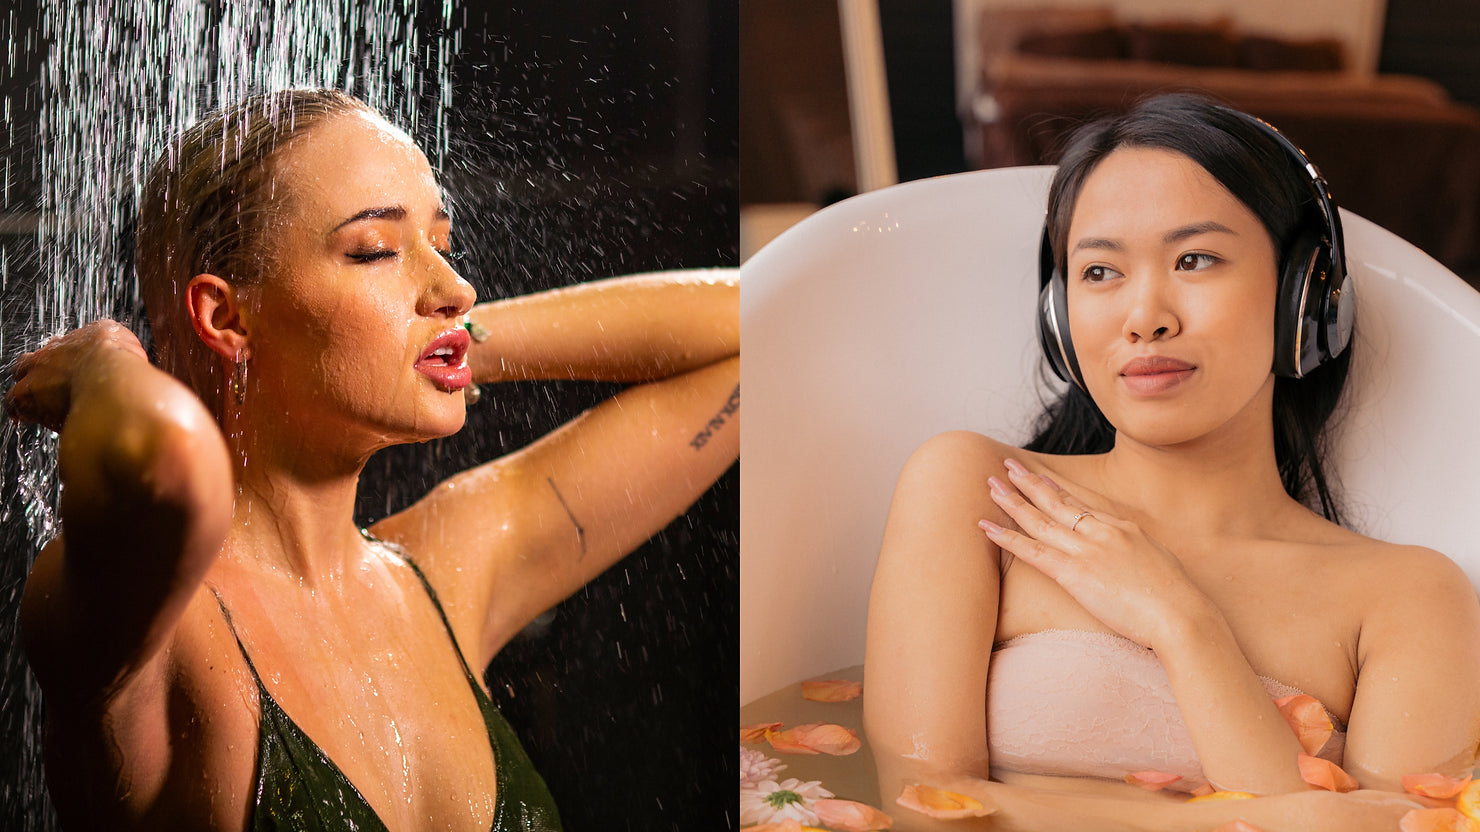 Shower vs Bath: Which Is Better?